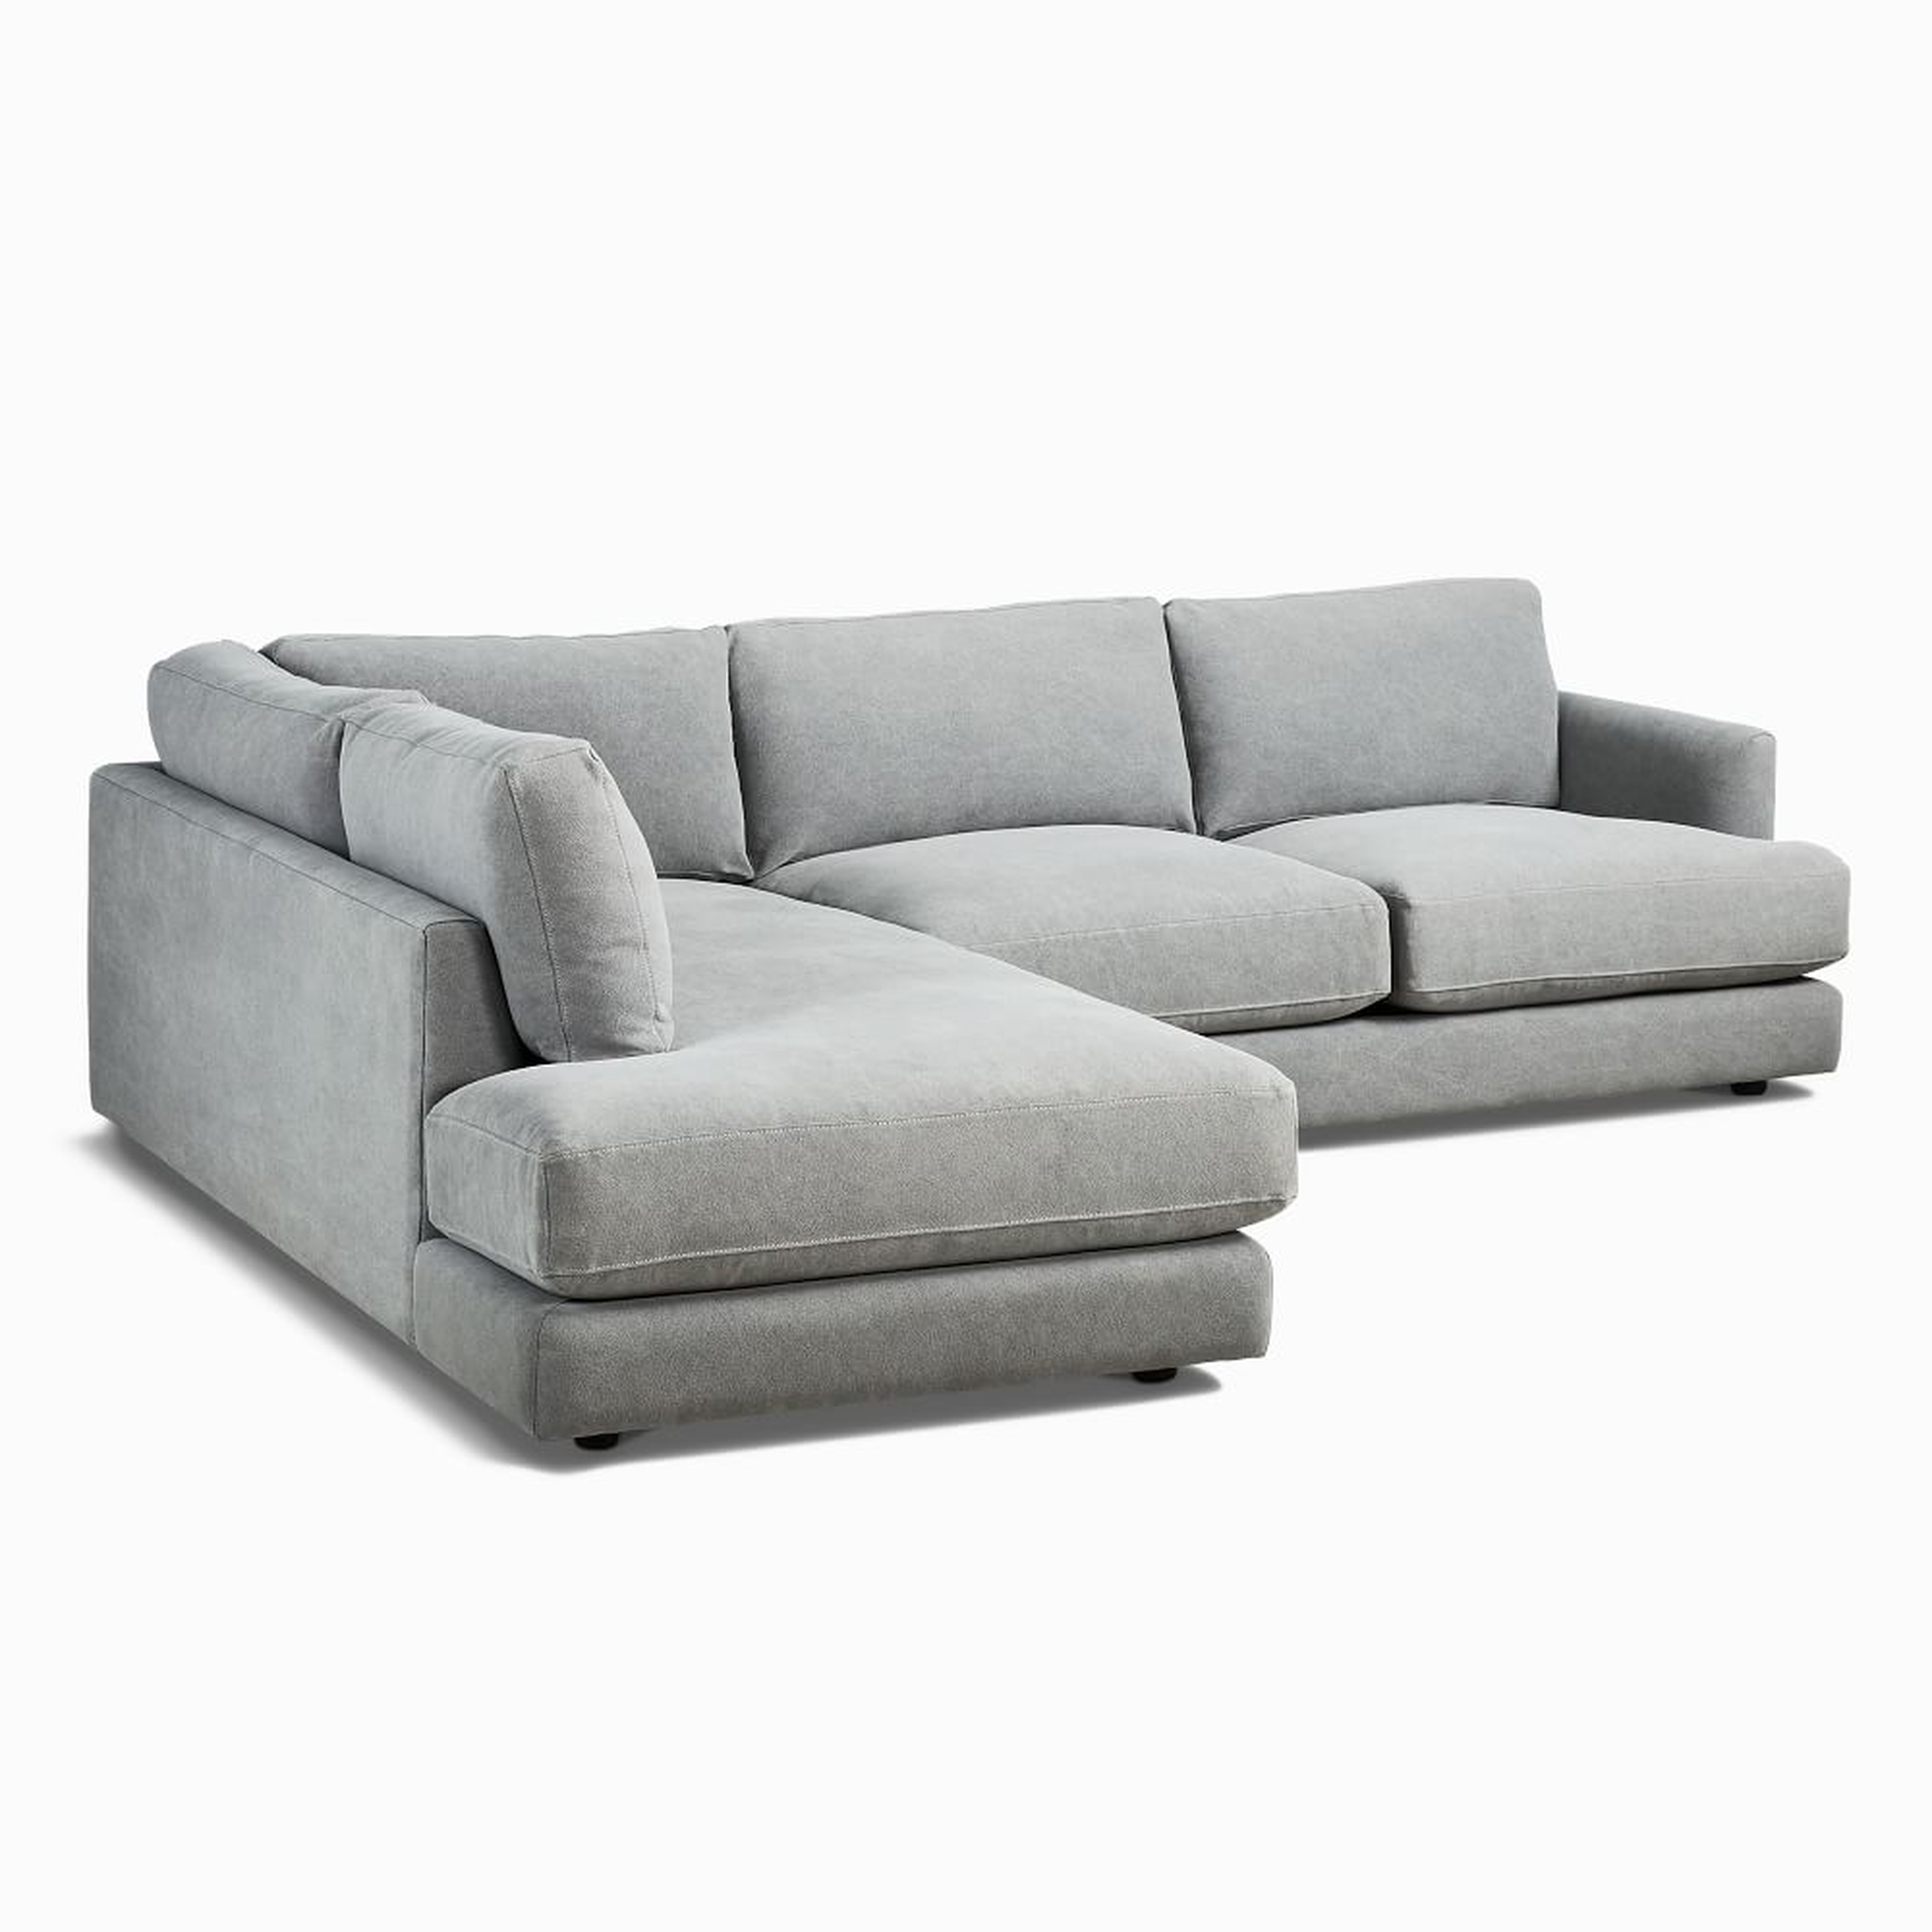 Haven 106" Left Multi Seat 2-Piece Bumper Chaise Sectional, Standard Depth, Performance Washed Canvas, Storm Gray - West Elm